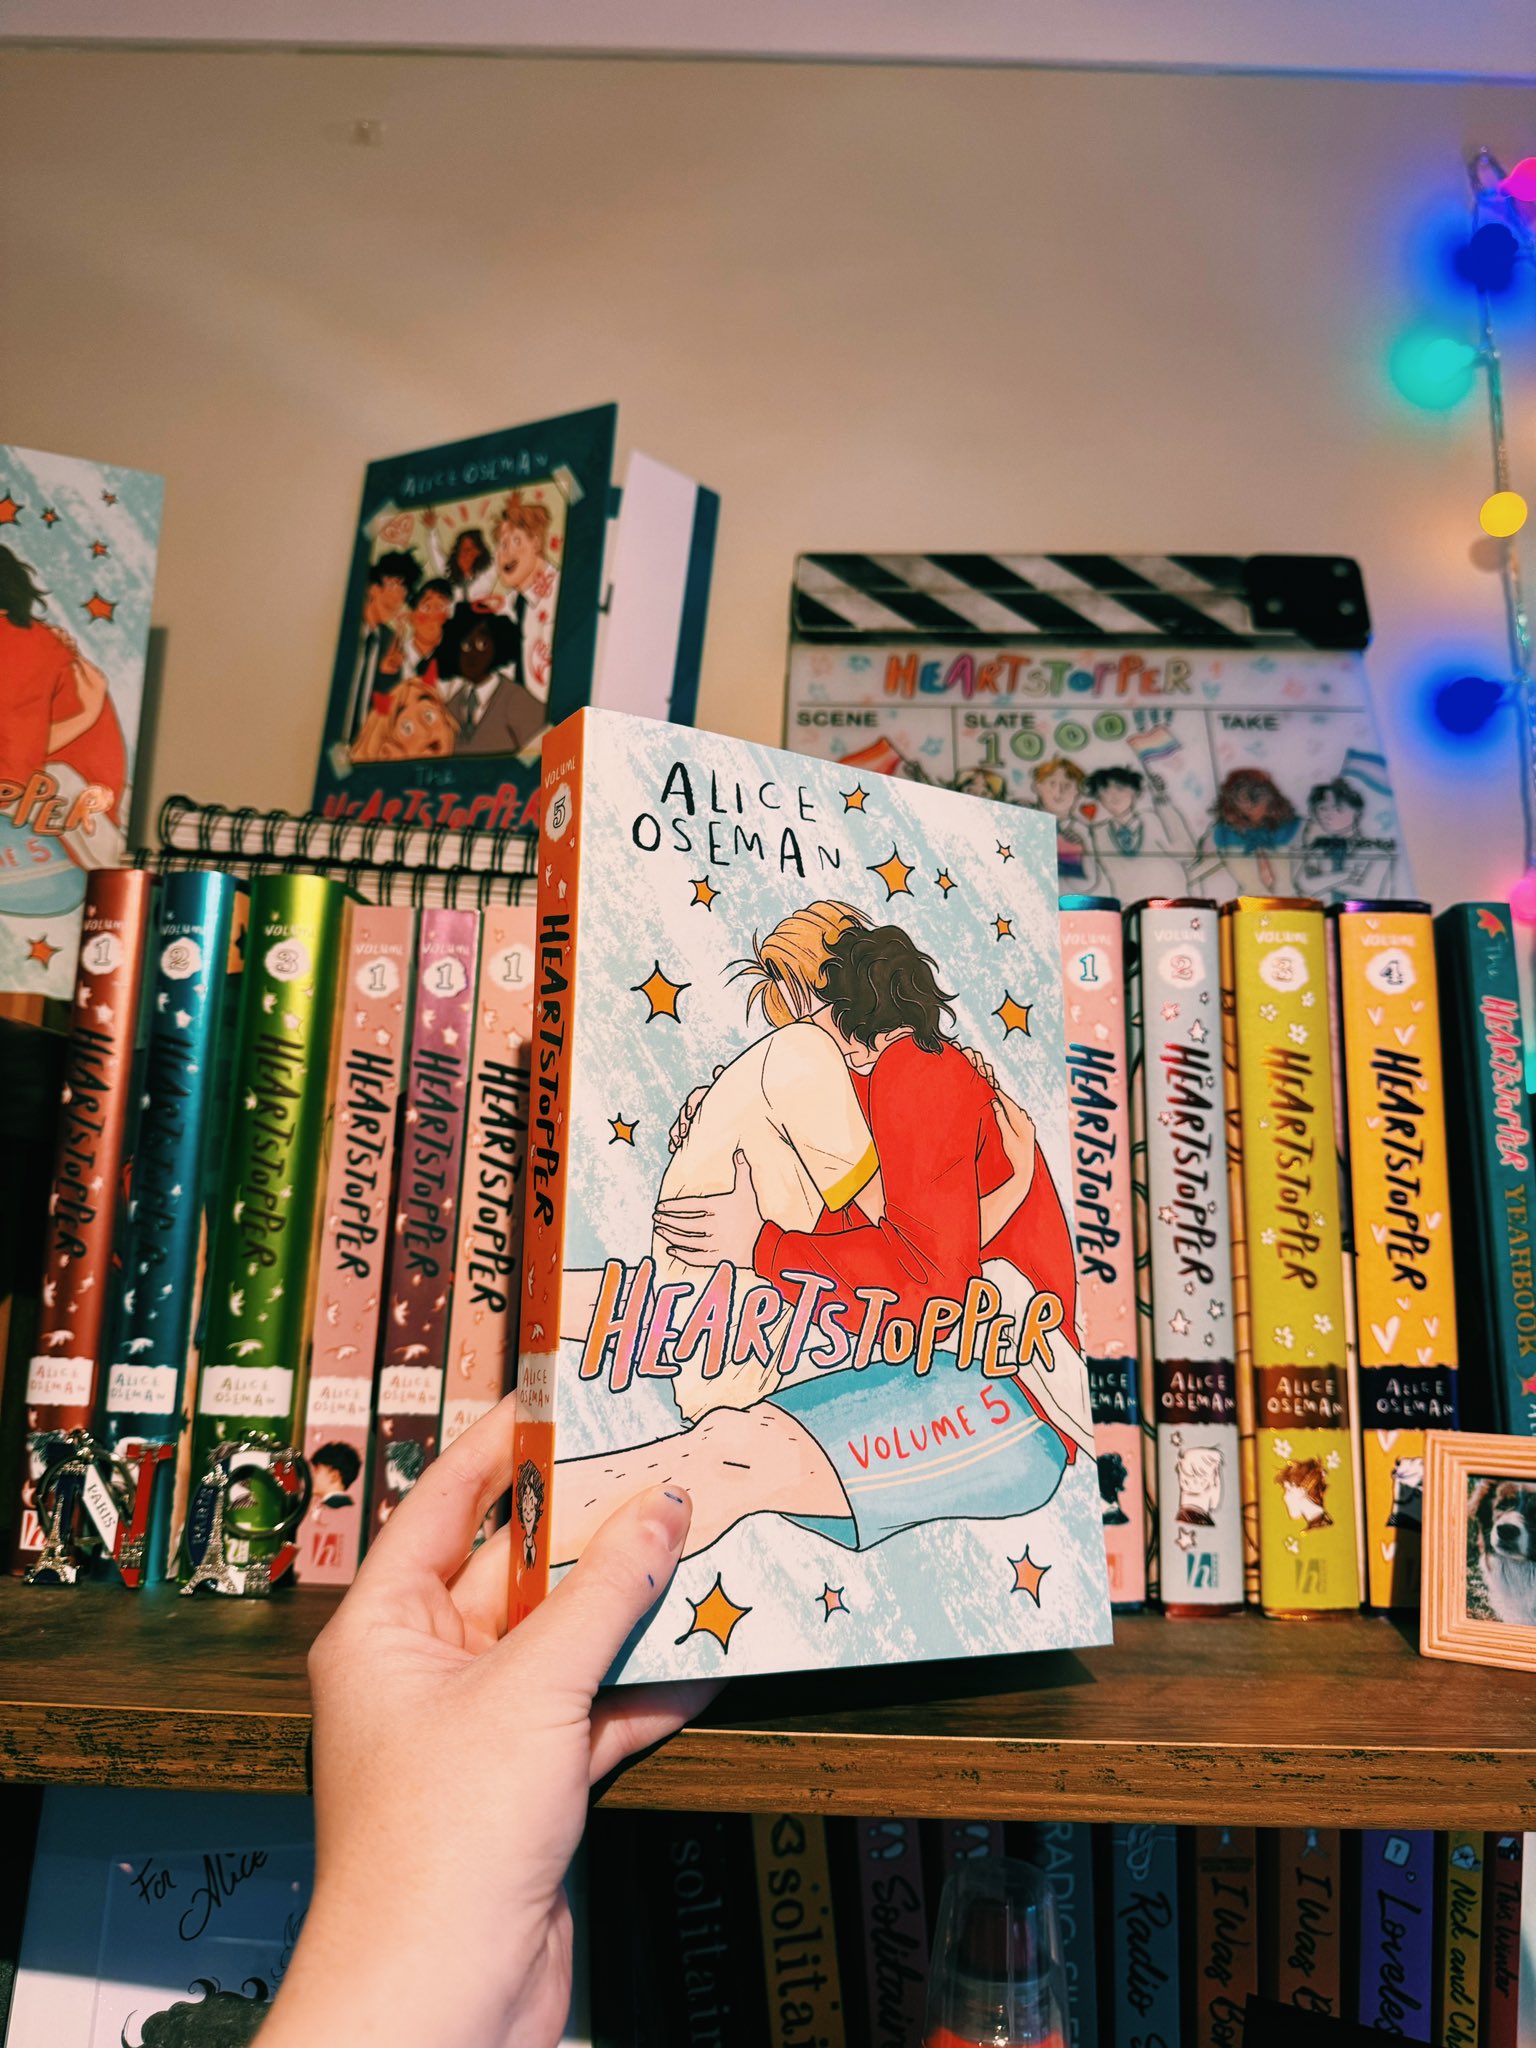 Alice Oseman Updates on X: Heartstopper Volume 5 (UK edition) is OUT  NOW!!! I really hope you enjoy it!! ✨✨✨✨✨  / X